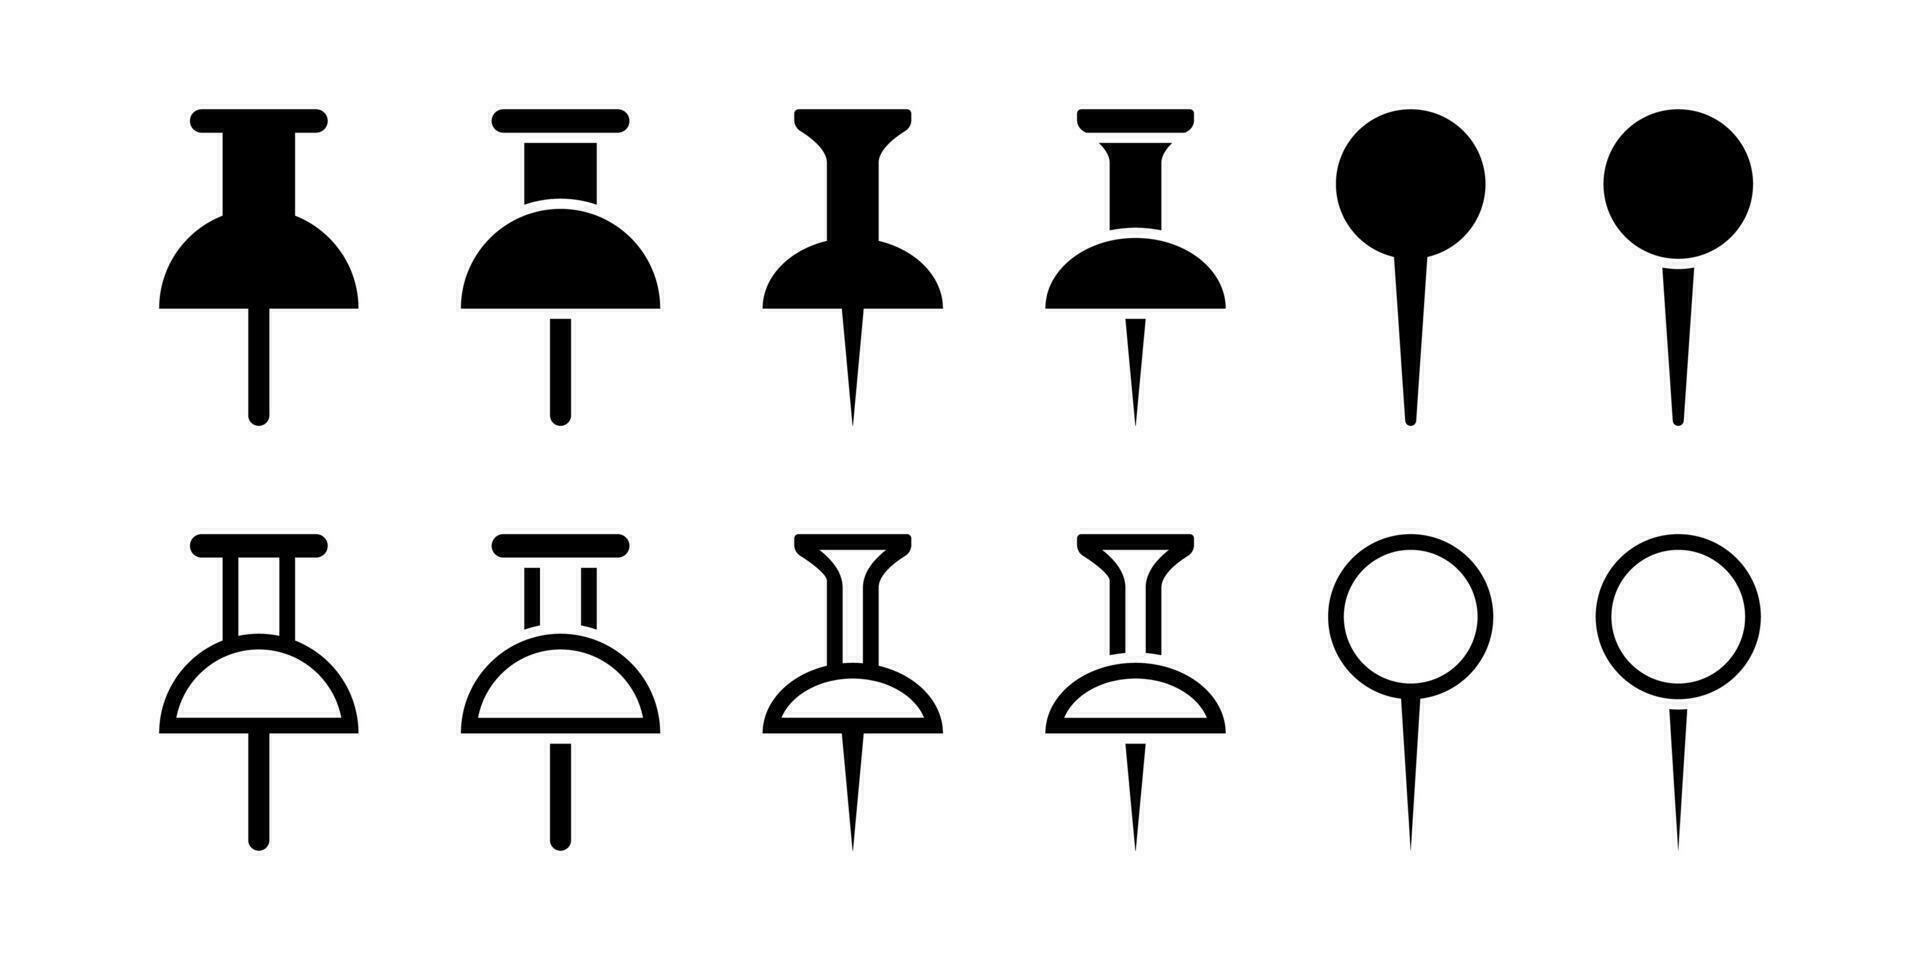 Pushpin icon set. Thumbtack icon collection. Drawing pin in glyph and outline. Thumb tack symbol in black vector